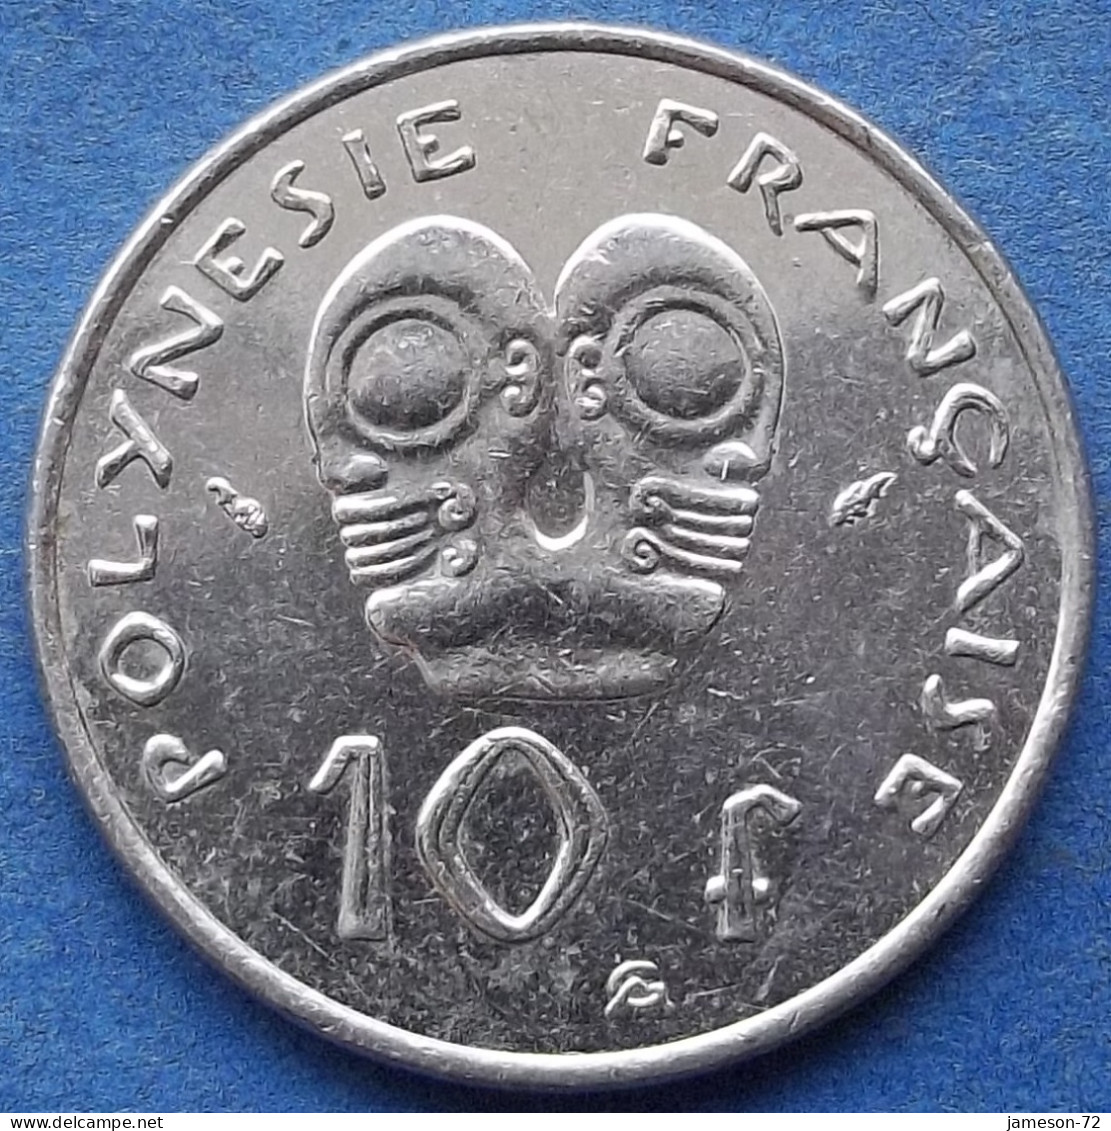 FRENCH POLYNESIA - 10 Francs 1991 KM# 8 French Overseas Territory - Edelweiss Coins - French Polynesia